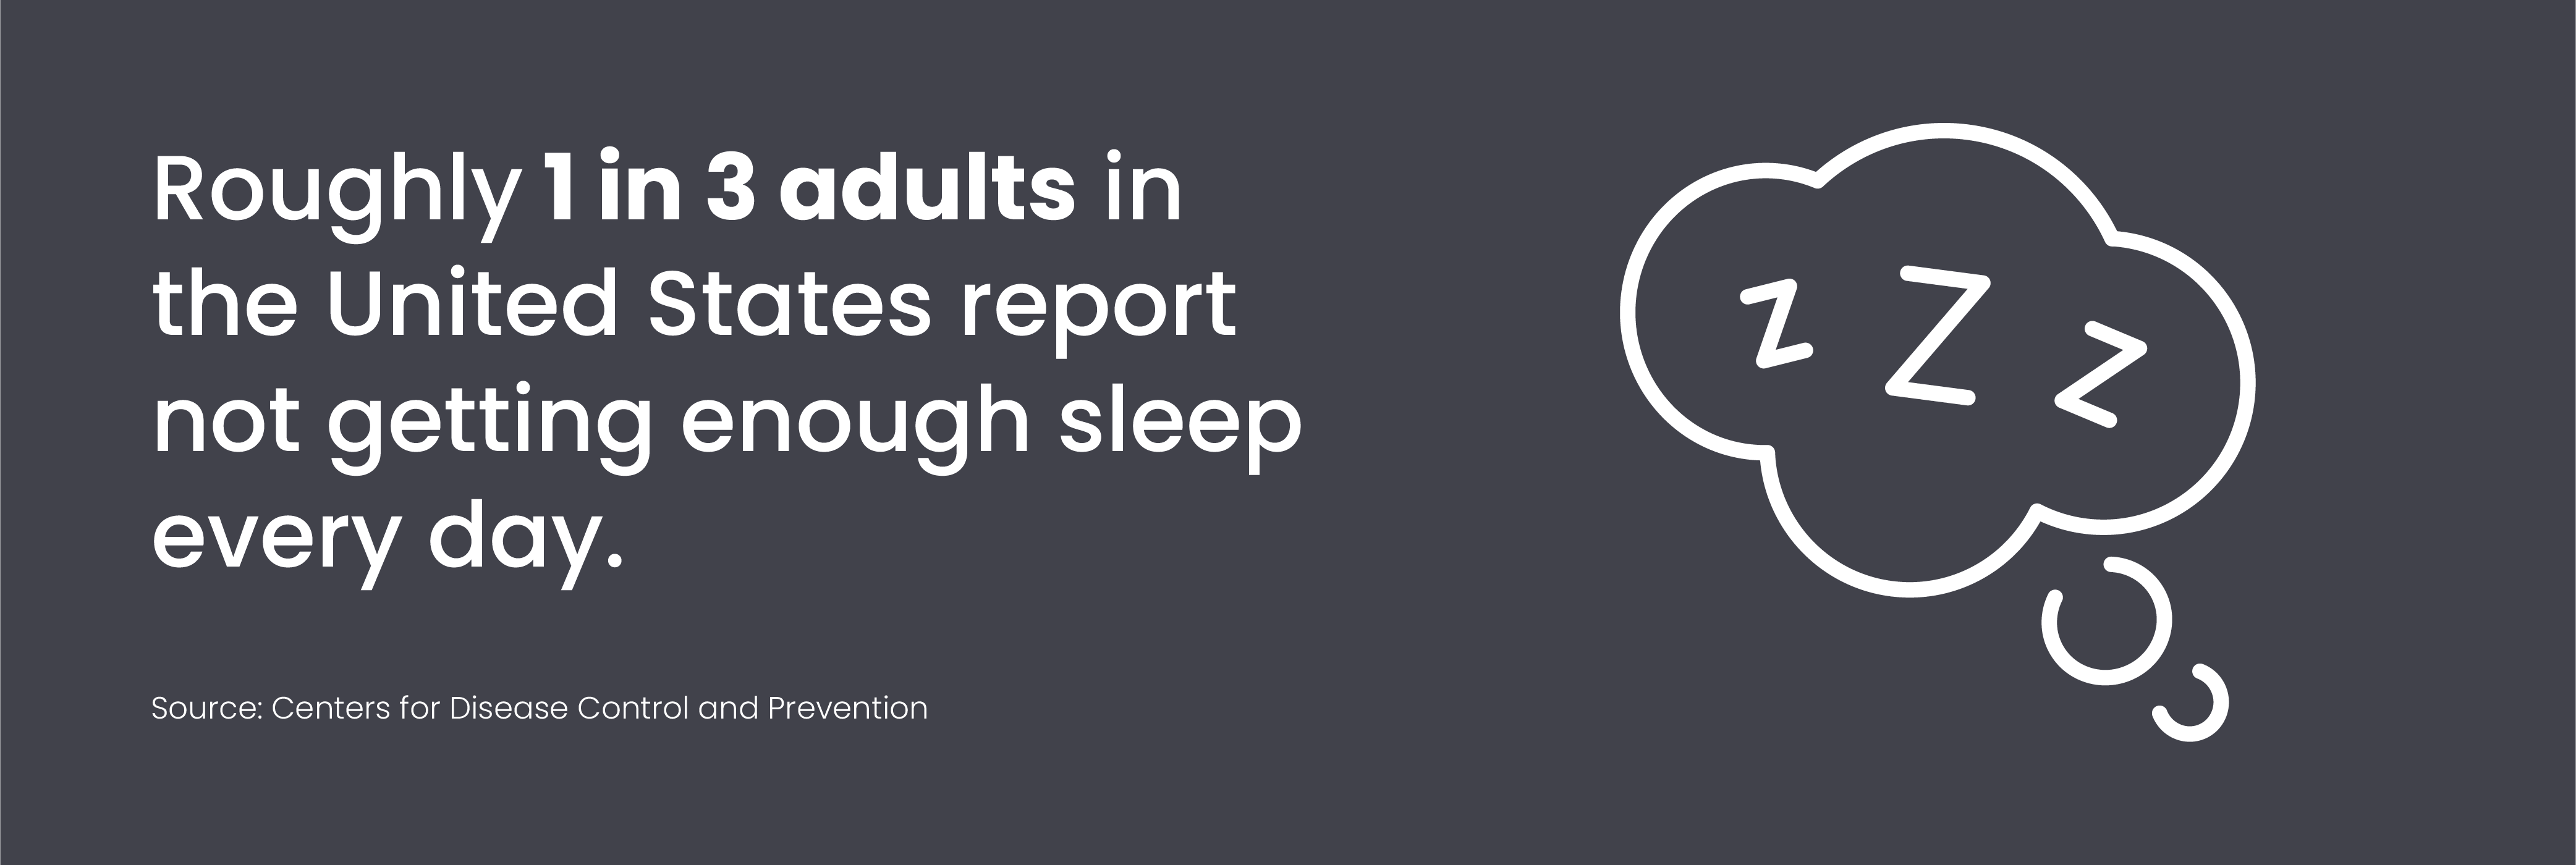 Roughly 1 in 3 adults in the United States report not getting enough sleep every day.